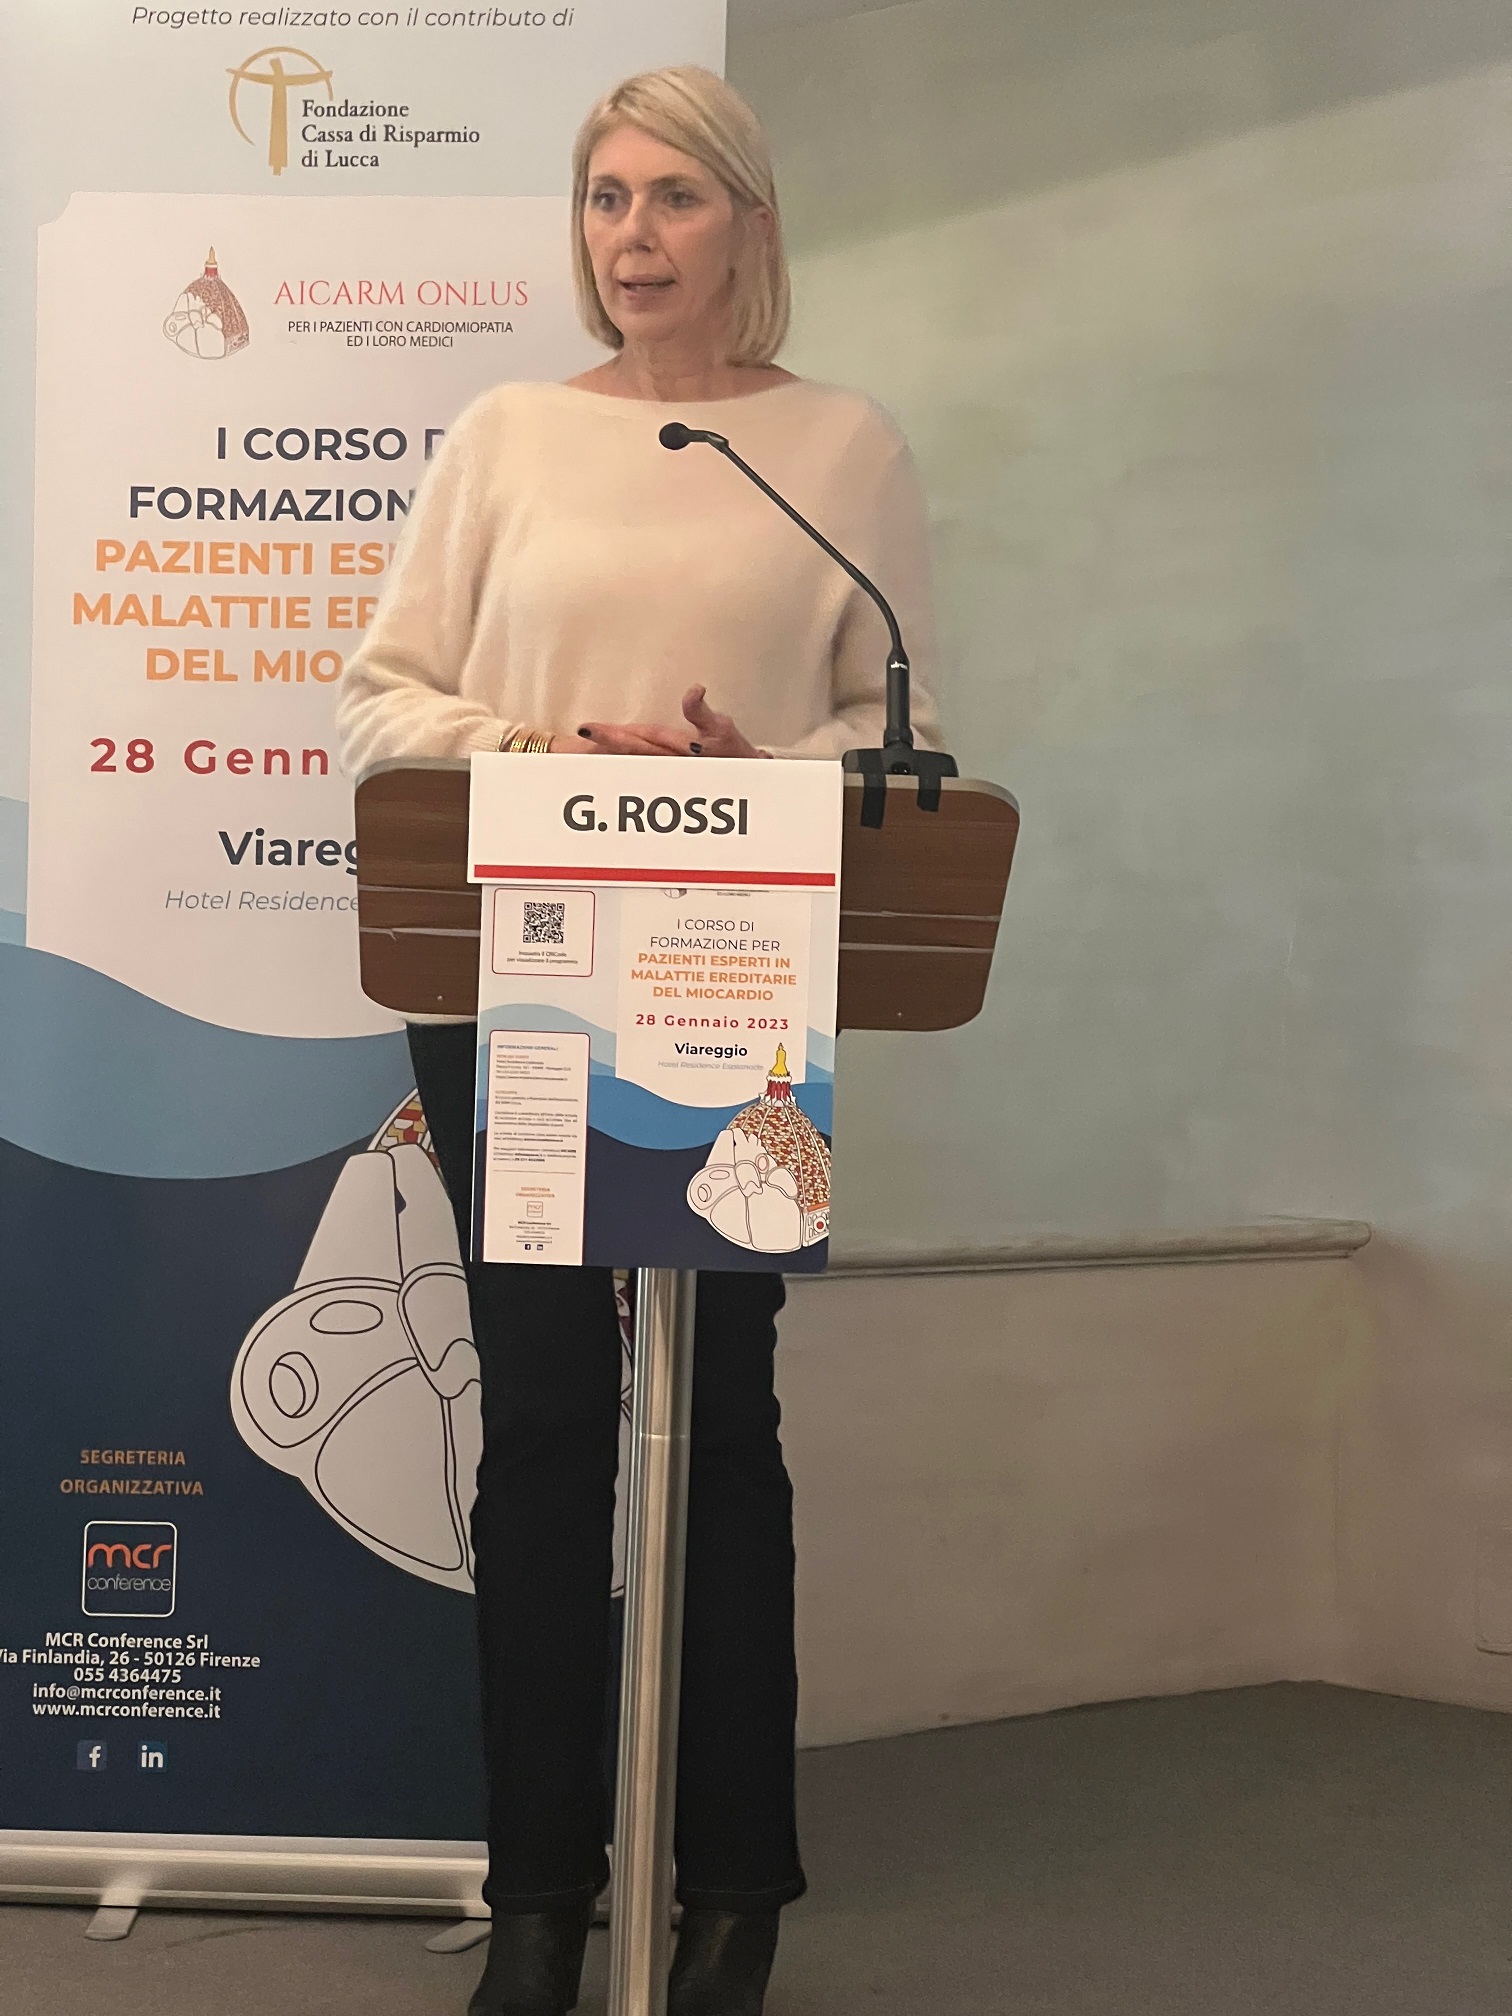 Dr. to Guendalina Rossi